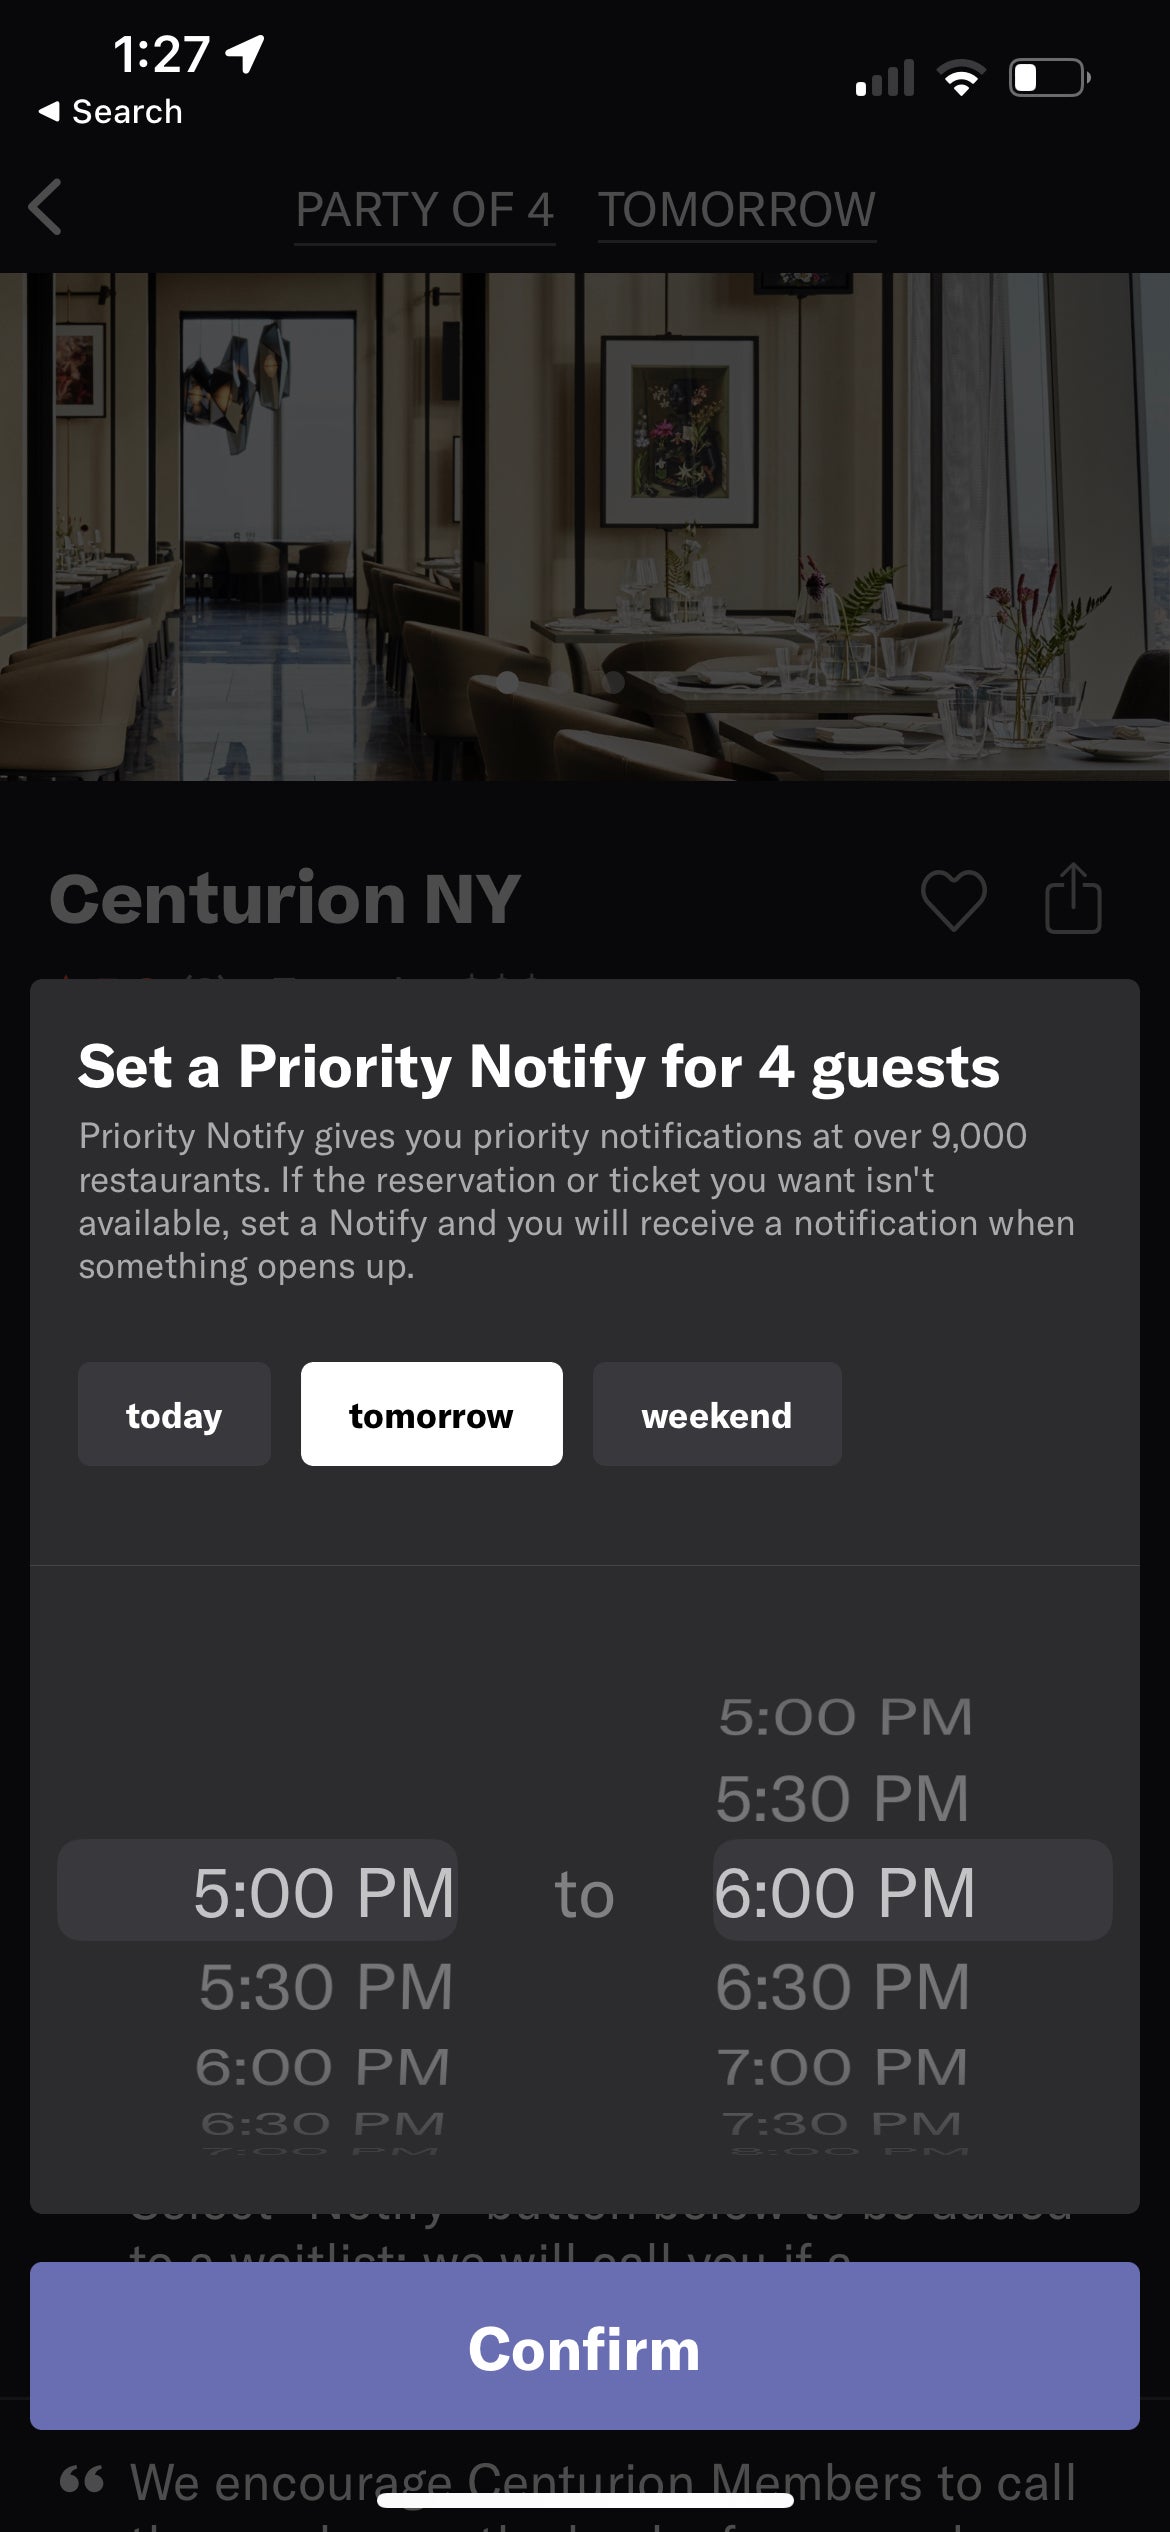 Centurion on Resy notification request. RESY